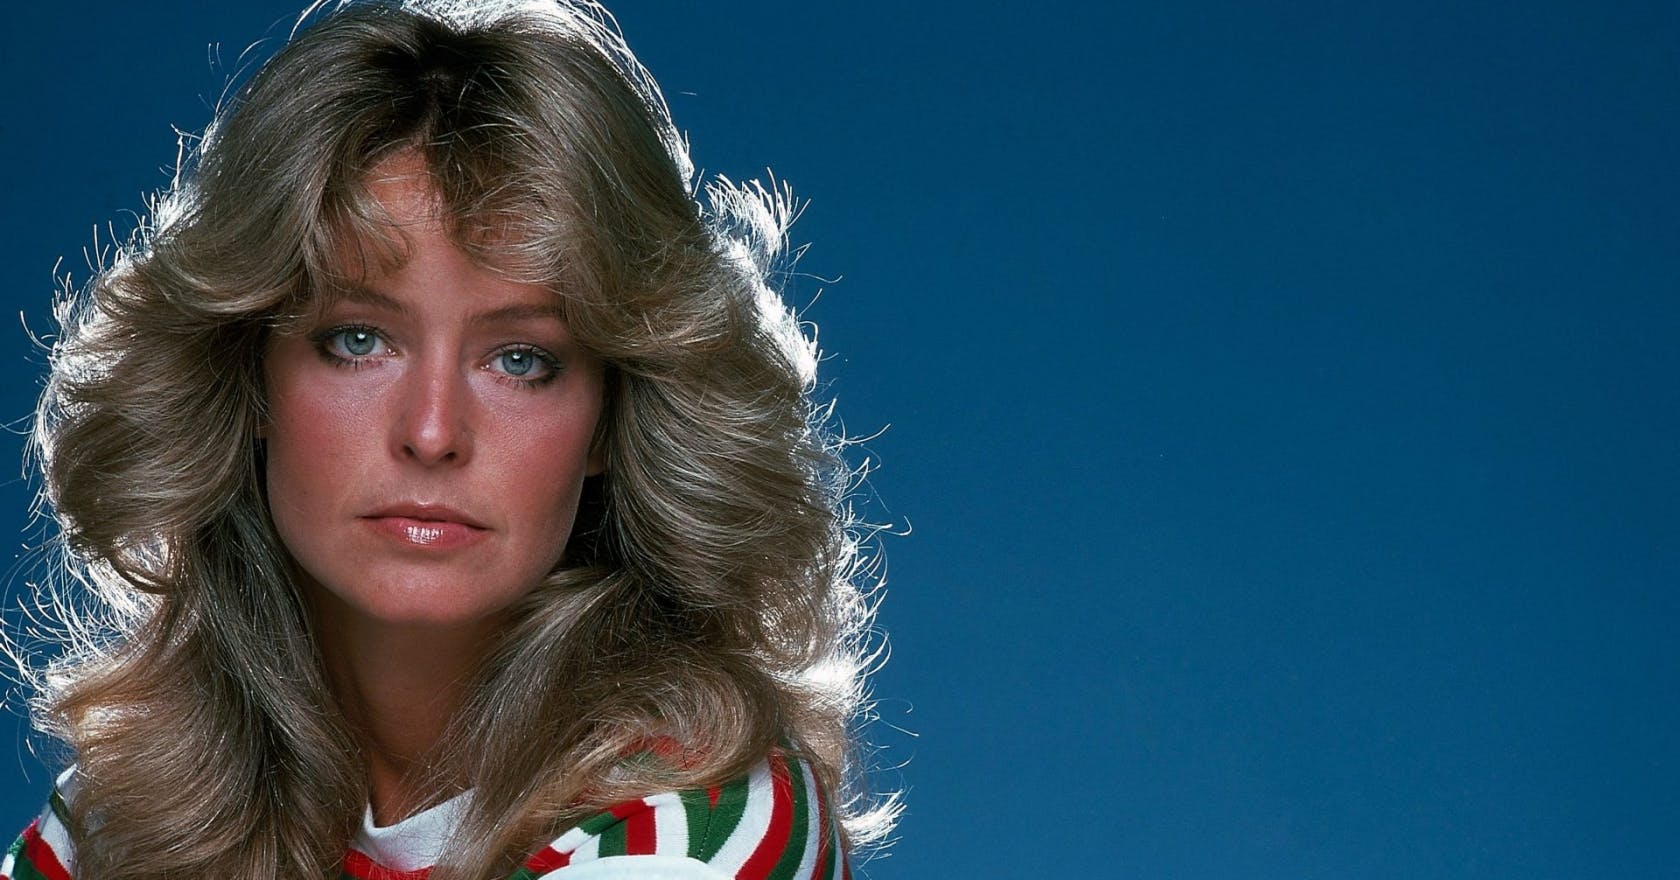 70s Hairstyle Inspiration: Curtain Bangs, Farah Fawcett Feathers